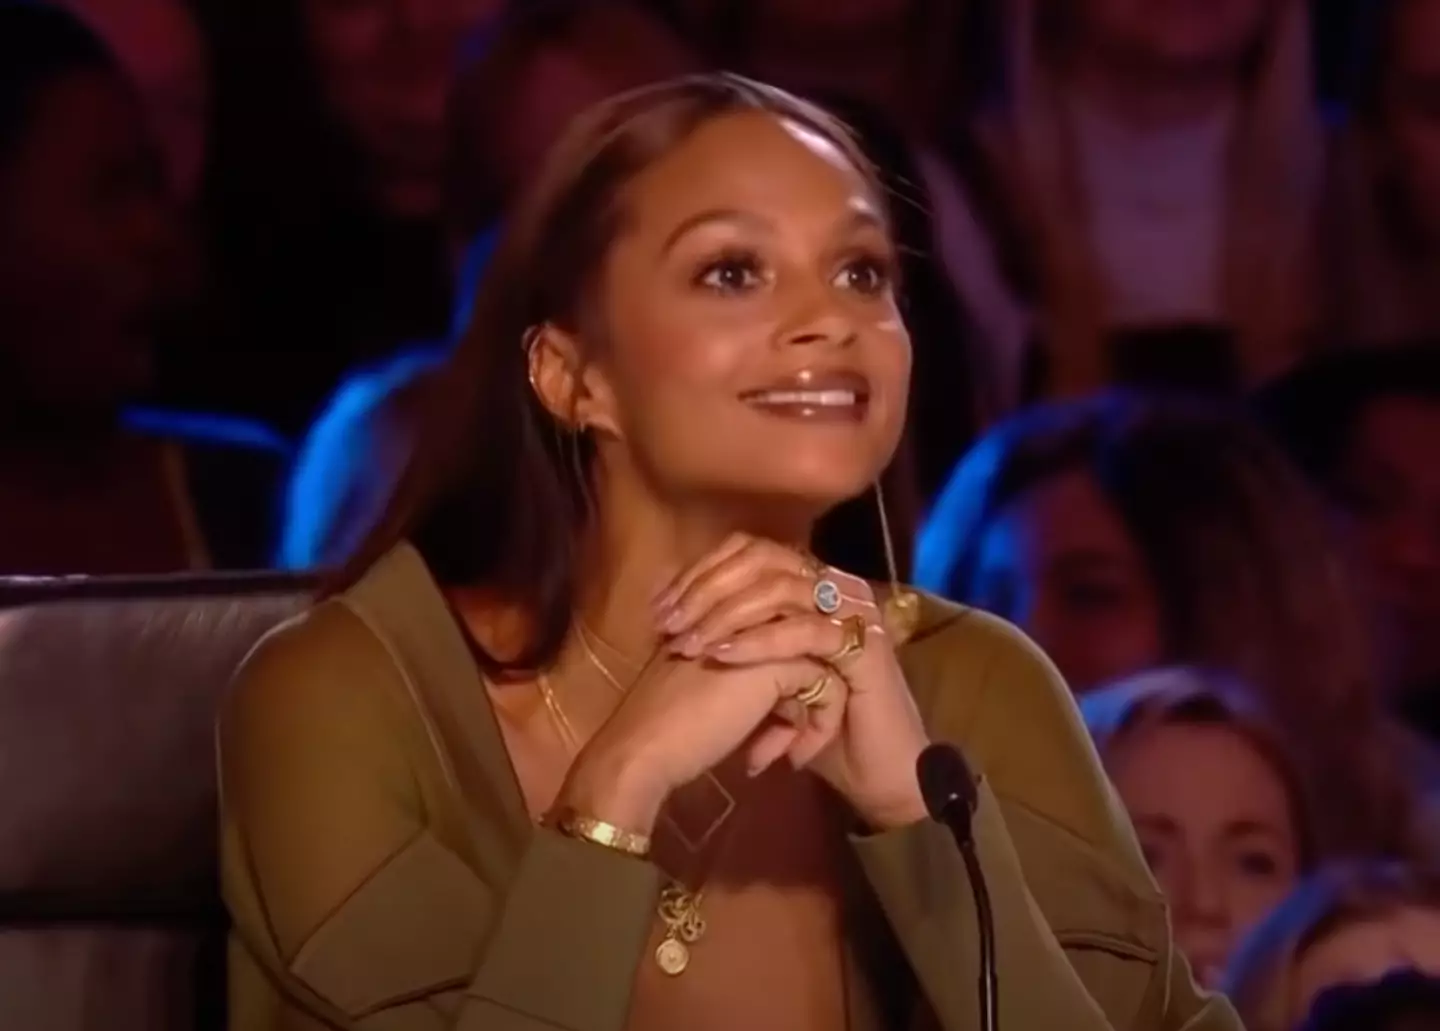 Alesha Dixon admitted to knowing Lifford Shillingford before he performed on Britain's Got Talent.